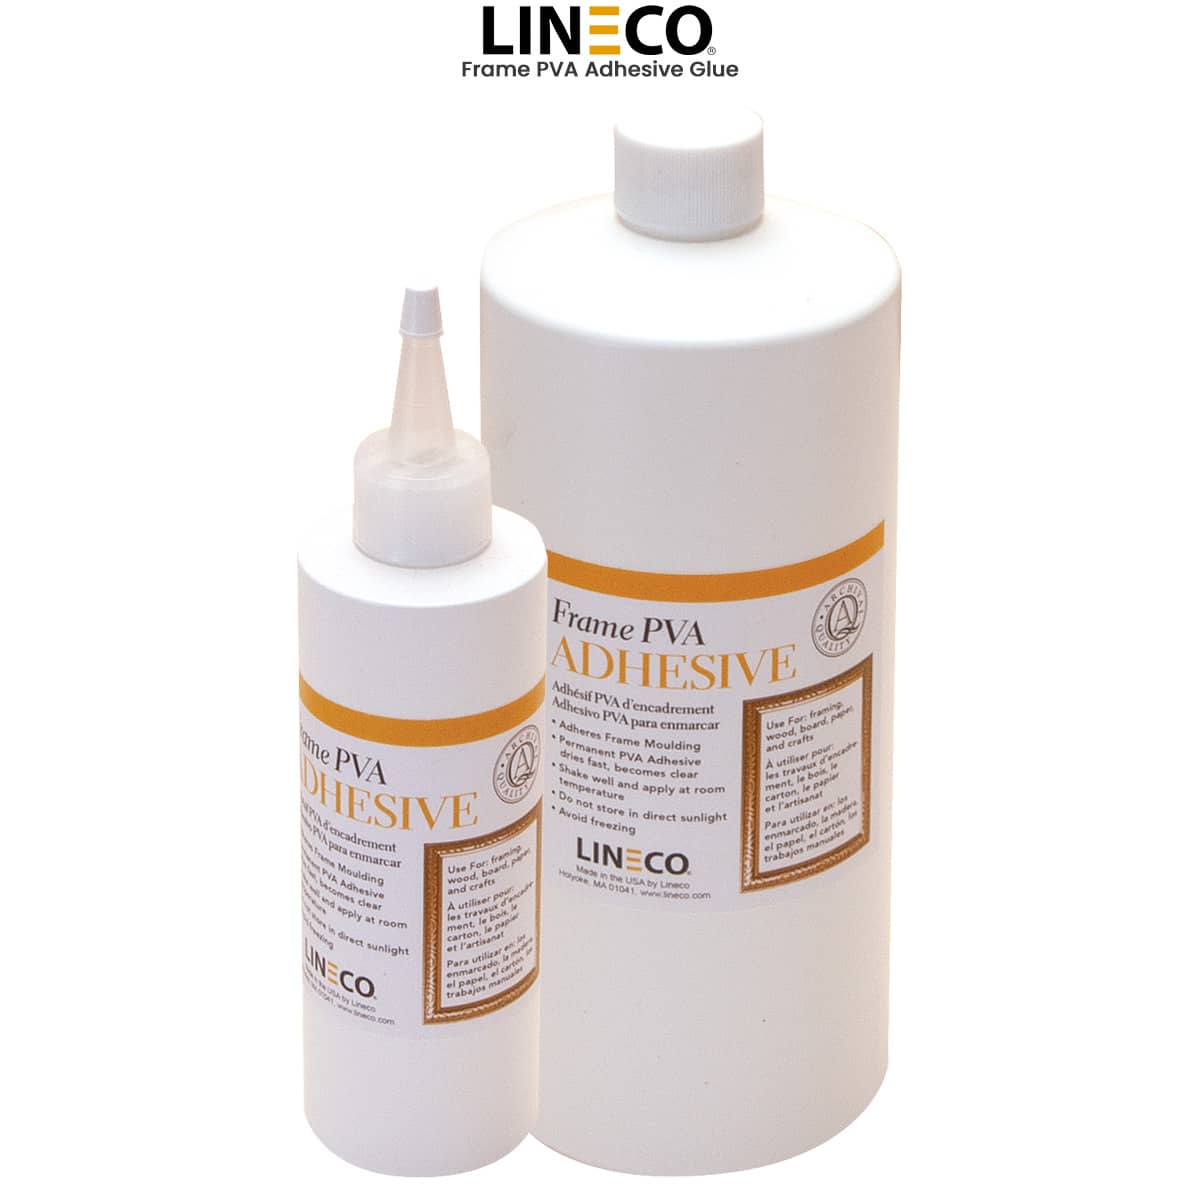  LINECO Neutral pH Adhesive, 4 Oz, Acid-Free, All-purpose Glue,  Dries Clear and Remains Flexible, Used for Bookbinding and Book Repair,  Framing, Collages, Paper Art and Crafts : Arts, Crafts & Sewing